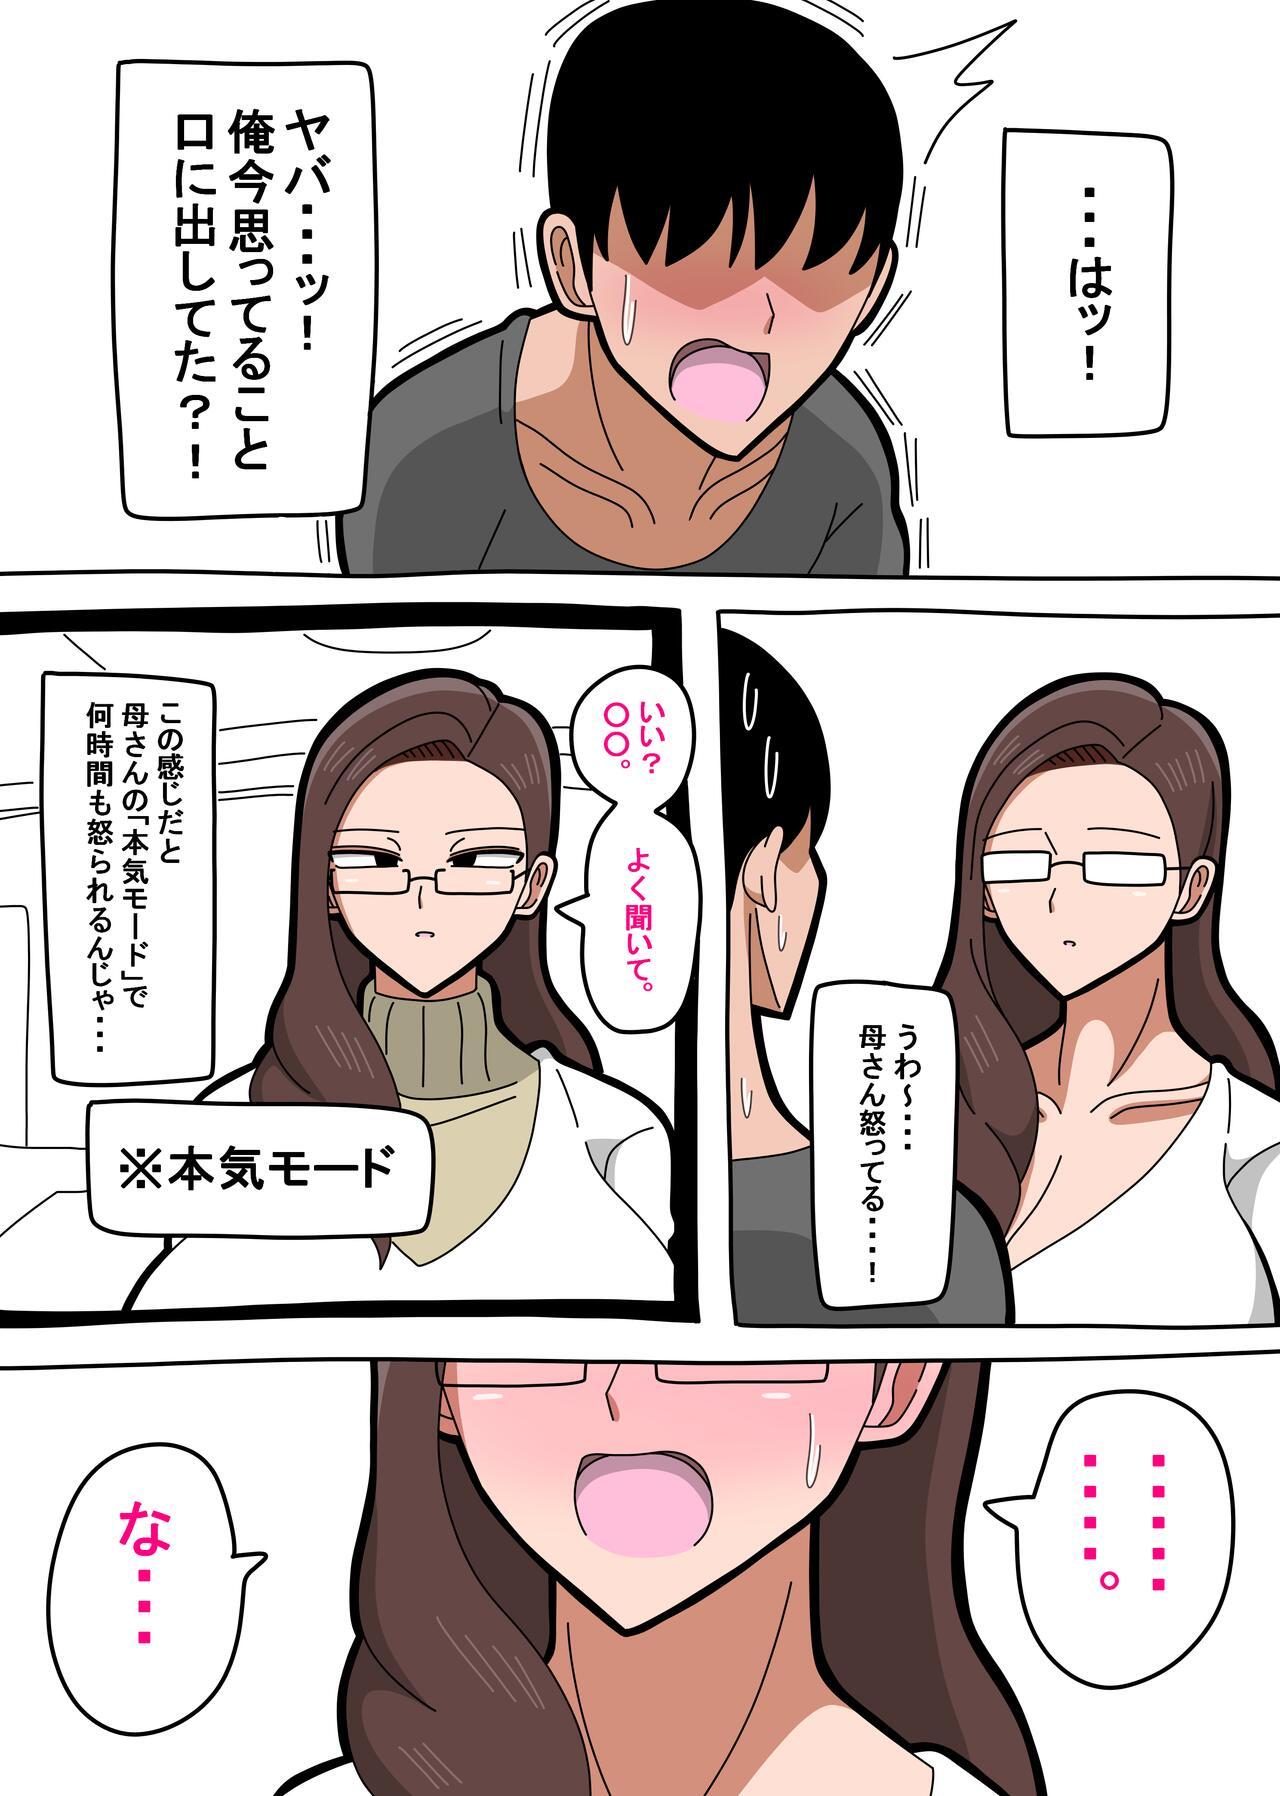 Fetish 母さんは女社長 - Original Reversecowgirl - Page 5